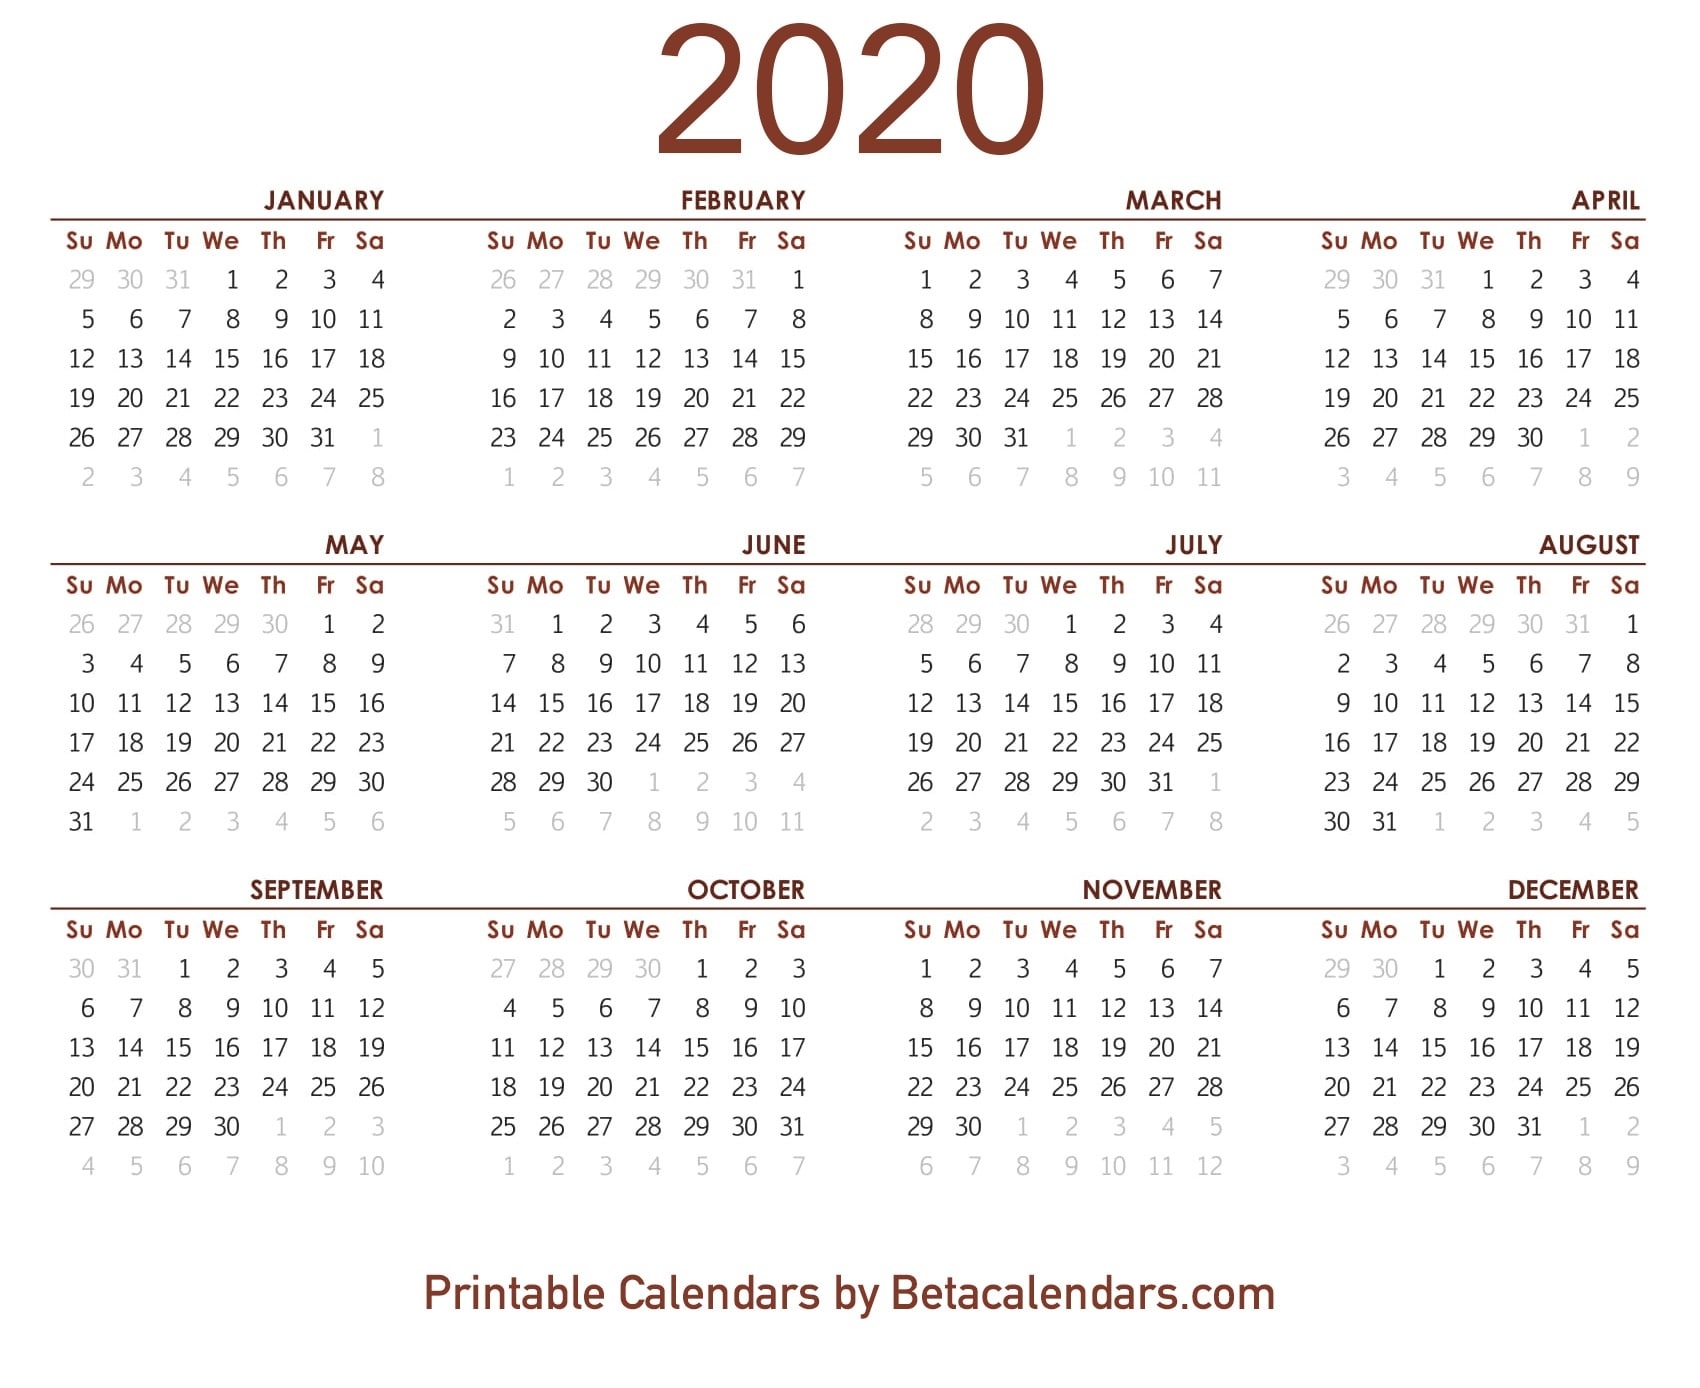 2020 Calendar - Free Printable Yearly Calendar 2020 2020 Calender With Luner Dates